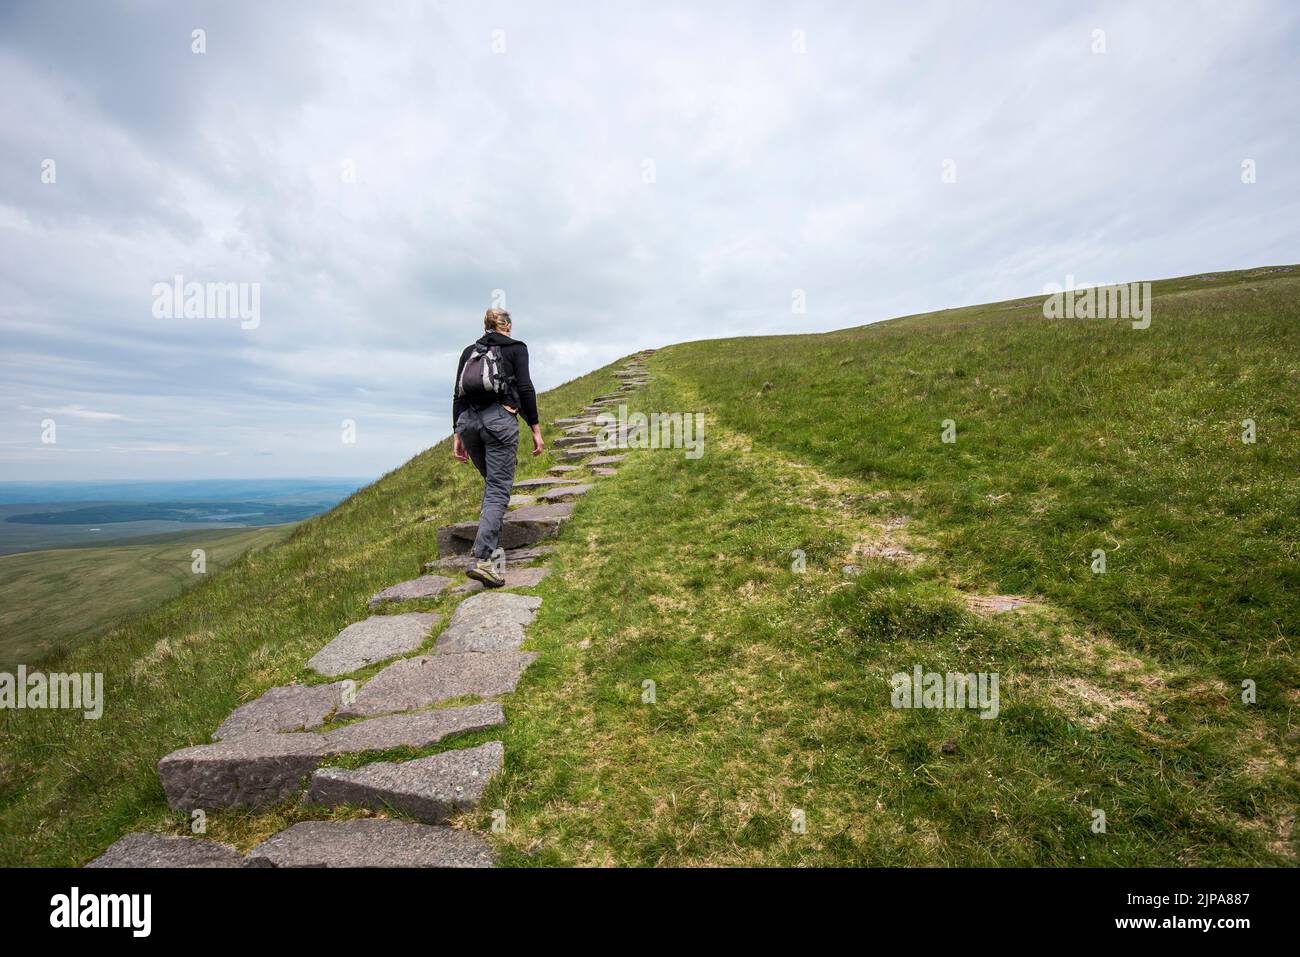 A person in a small backpack climbs stone steps in the Brecon Beacons in Wales UK Stock Photo